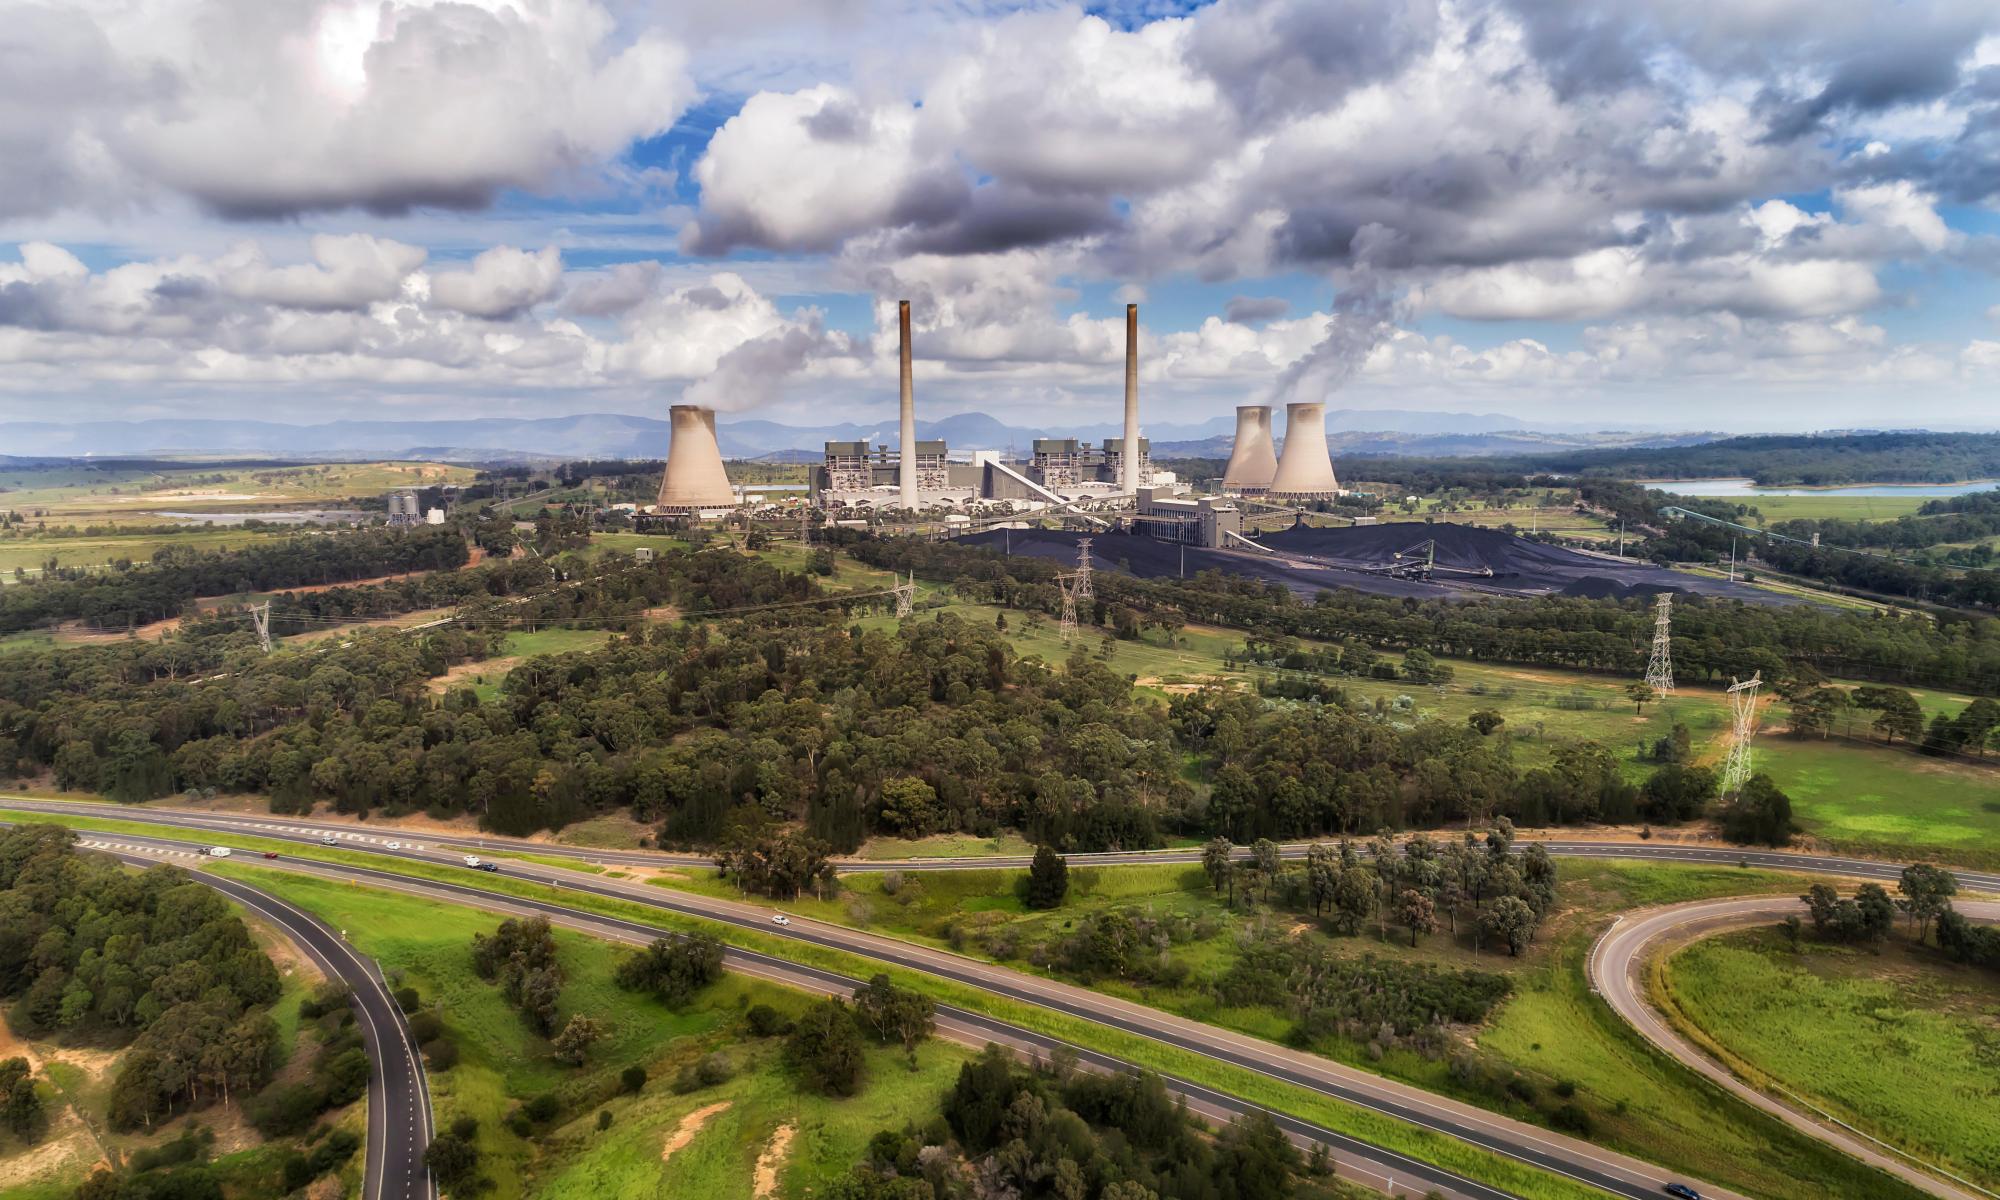 NSW plan for 21 coal plants would create seven years of nation's emissions, expert says